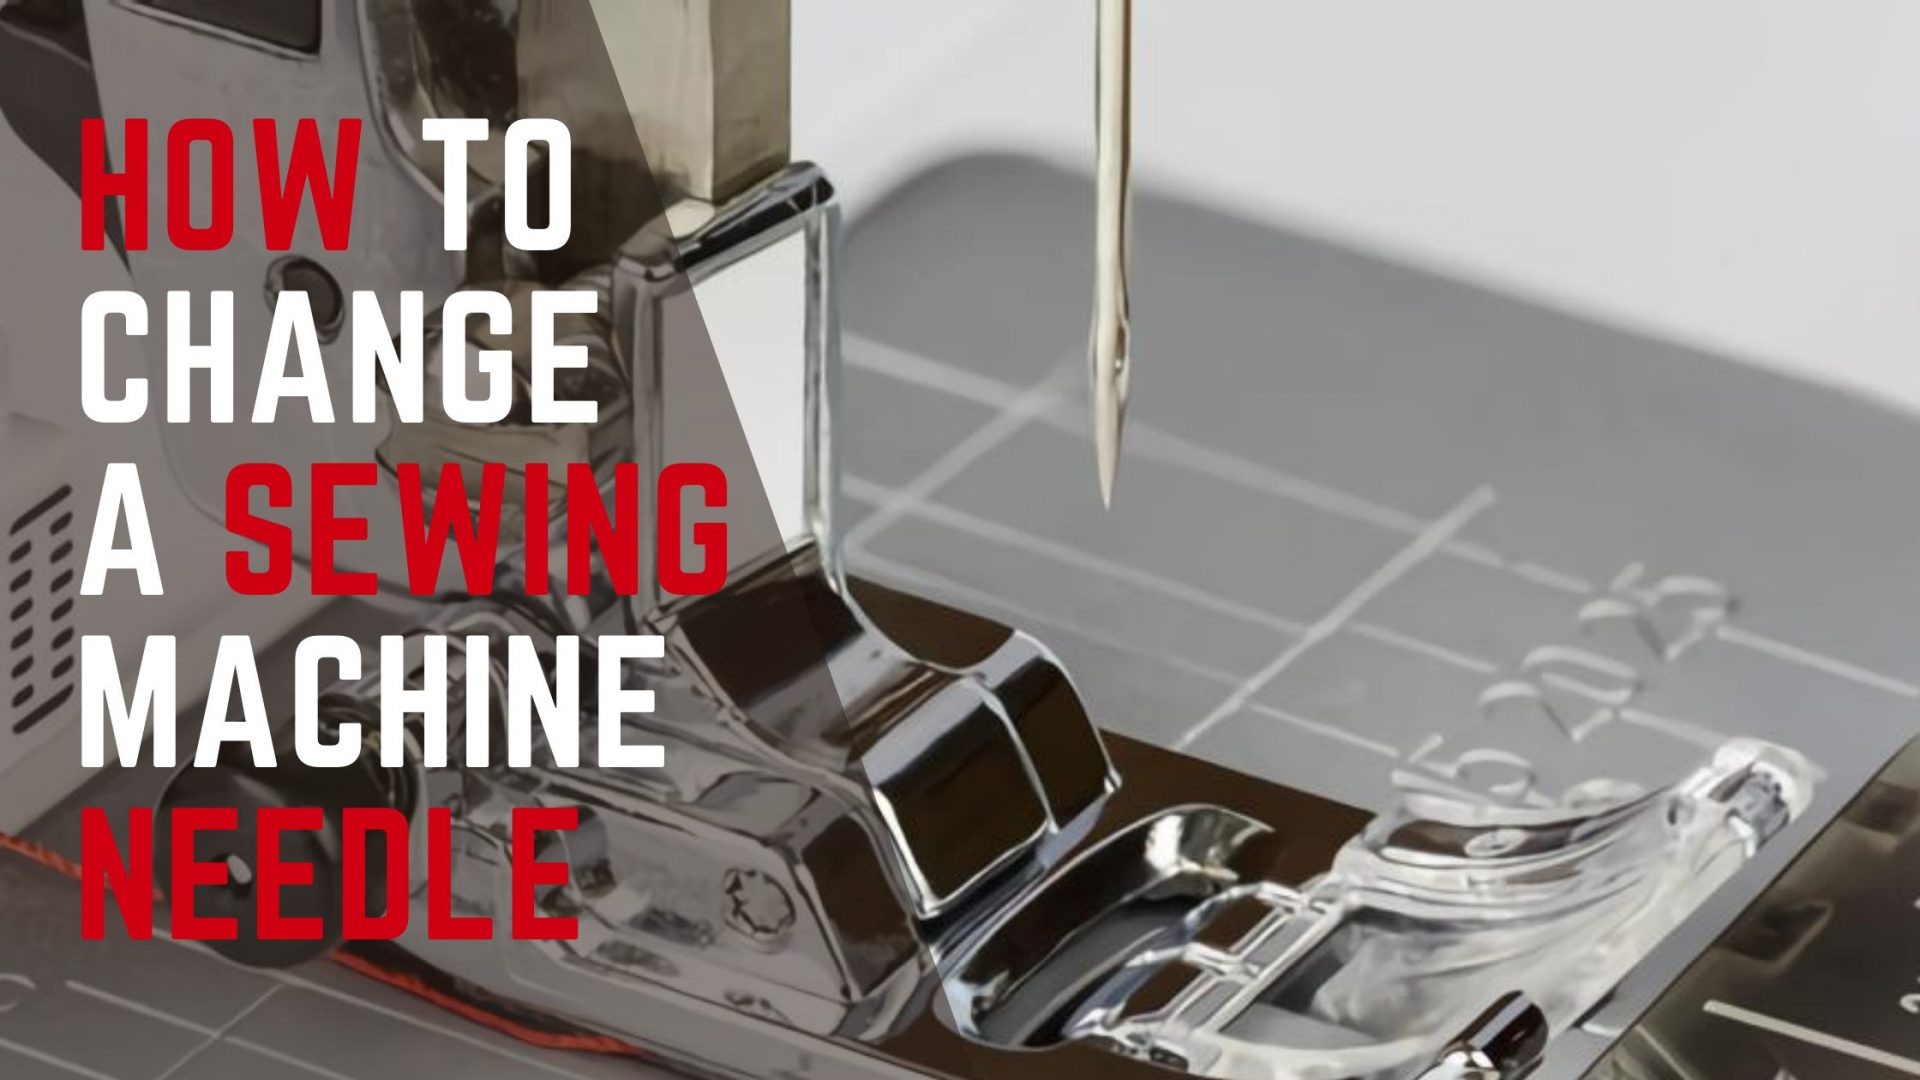 How to Change a Sewing Machine Needle